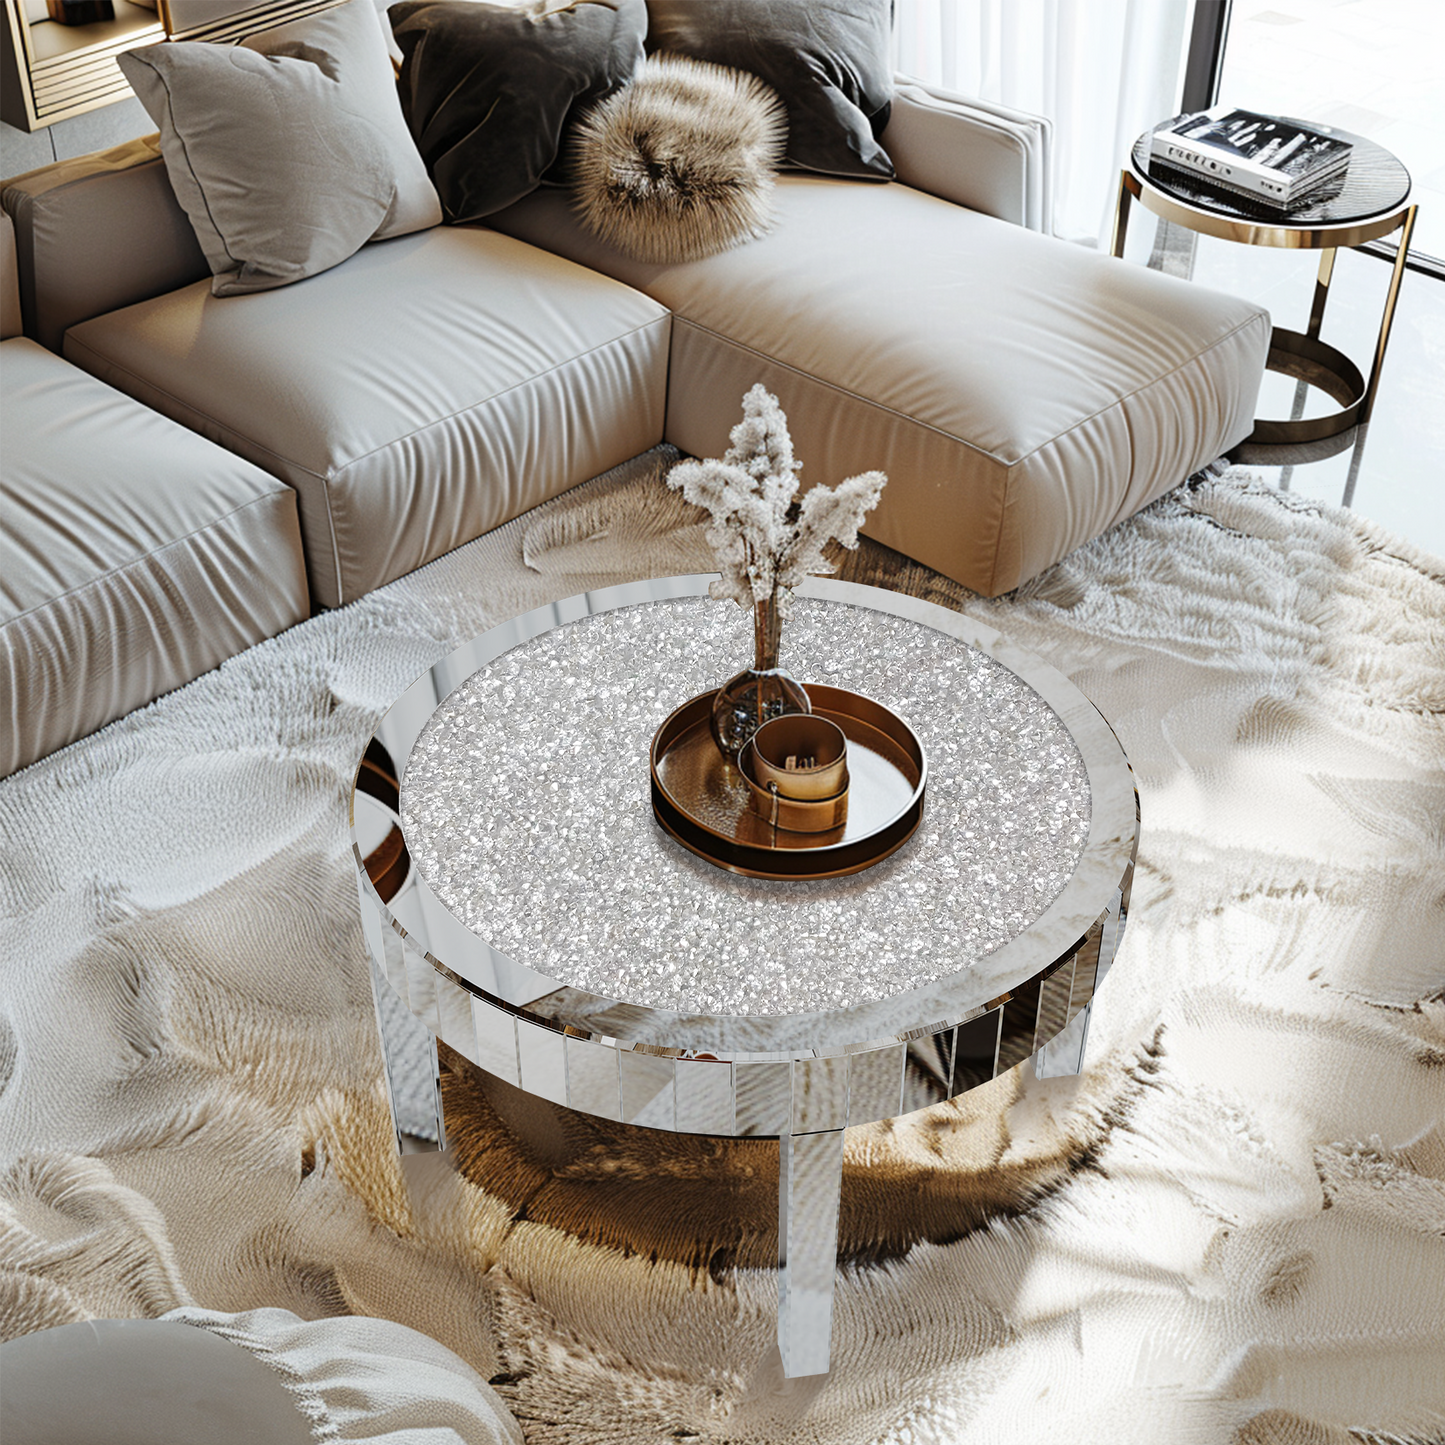 Clear Mirrored Center Table Coffee Table Crystal Diamonds Inlay Accent Table